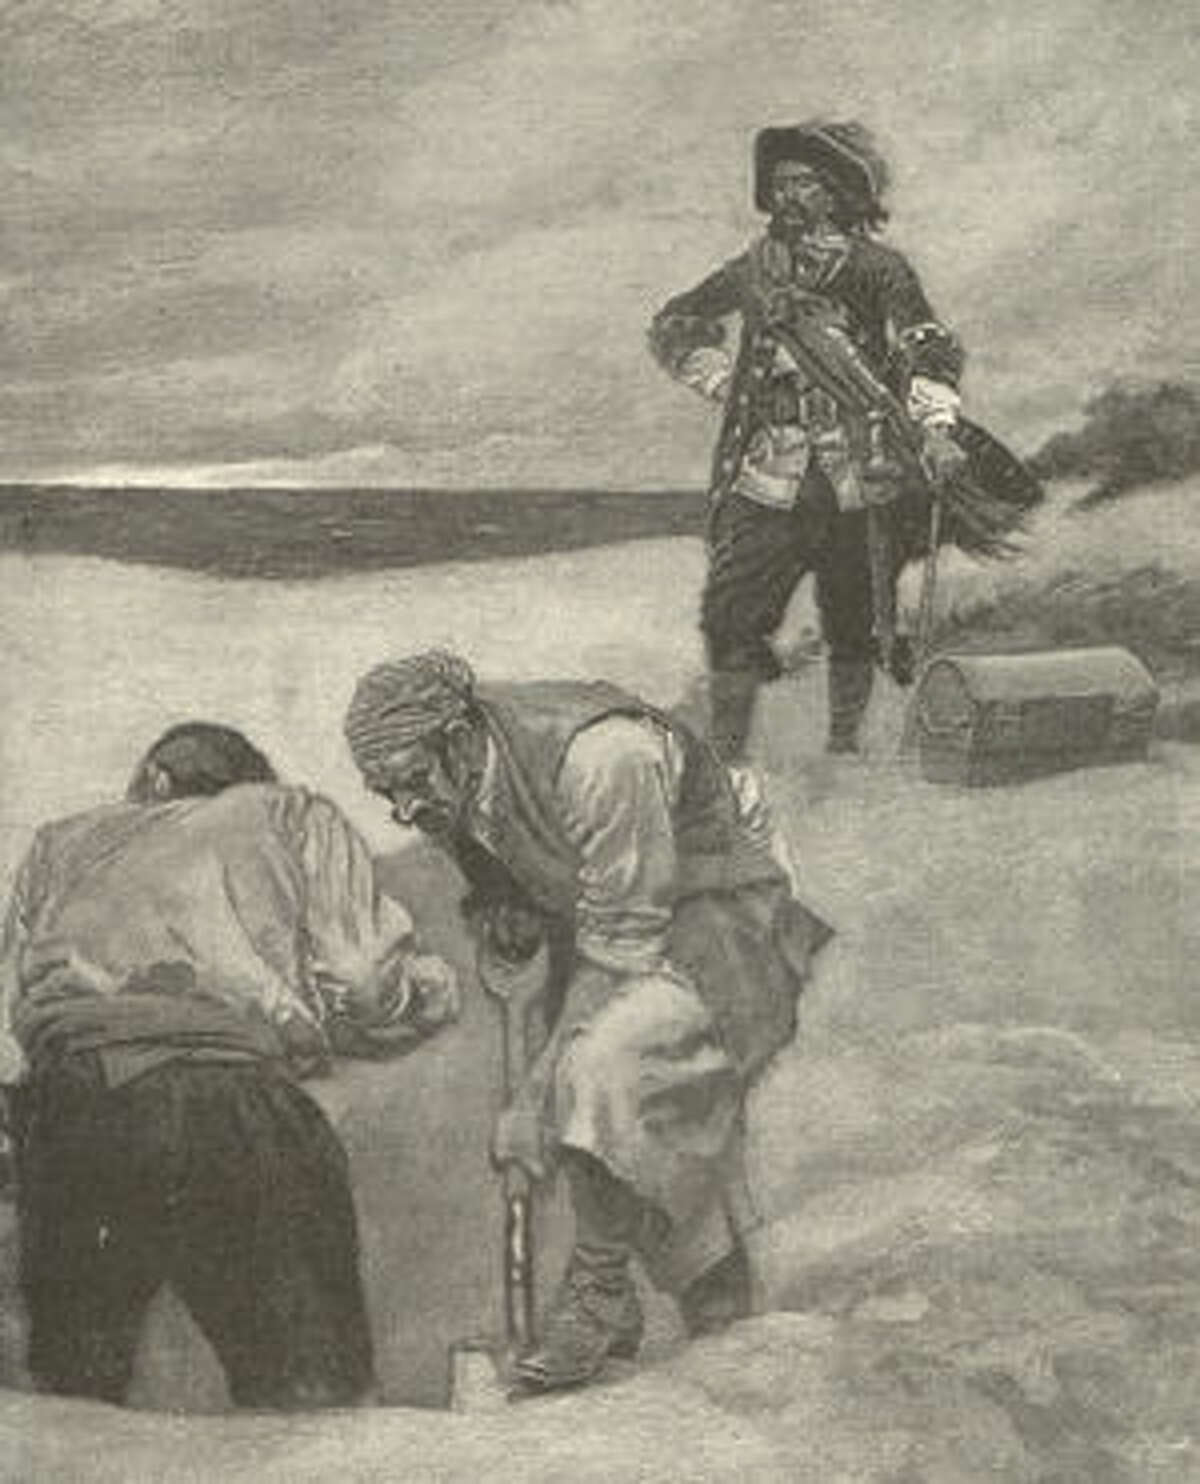 Captain Kidd depicted burying treasure on Gardiner’s Island in a Howard Pyle illustration from Harper’s New Monthly Magazine, 1894.